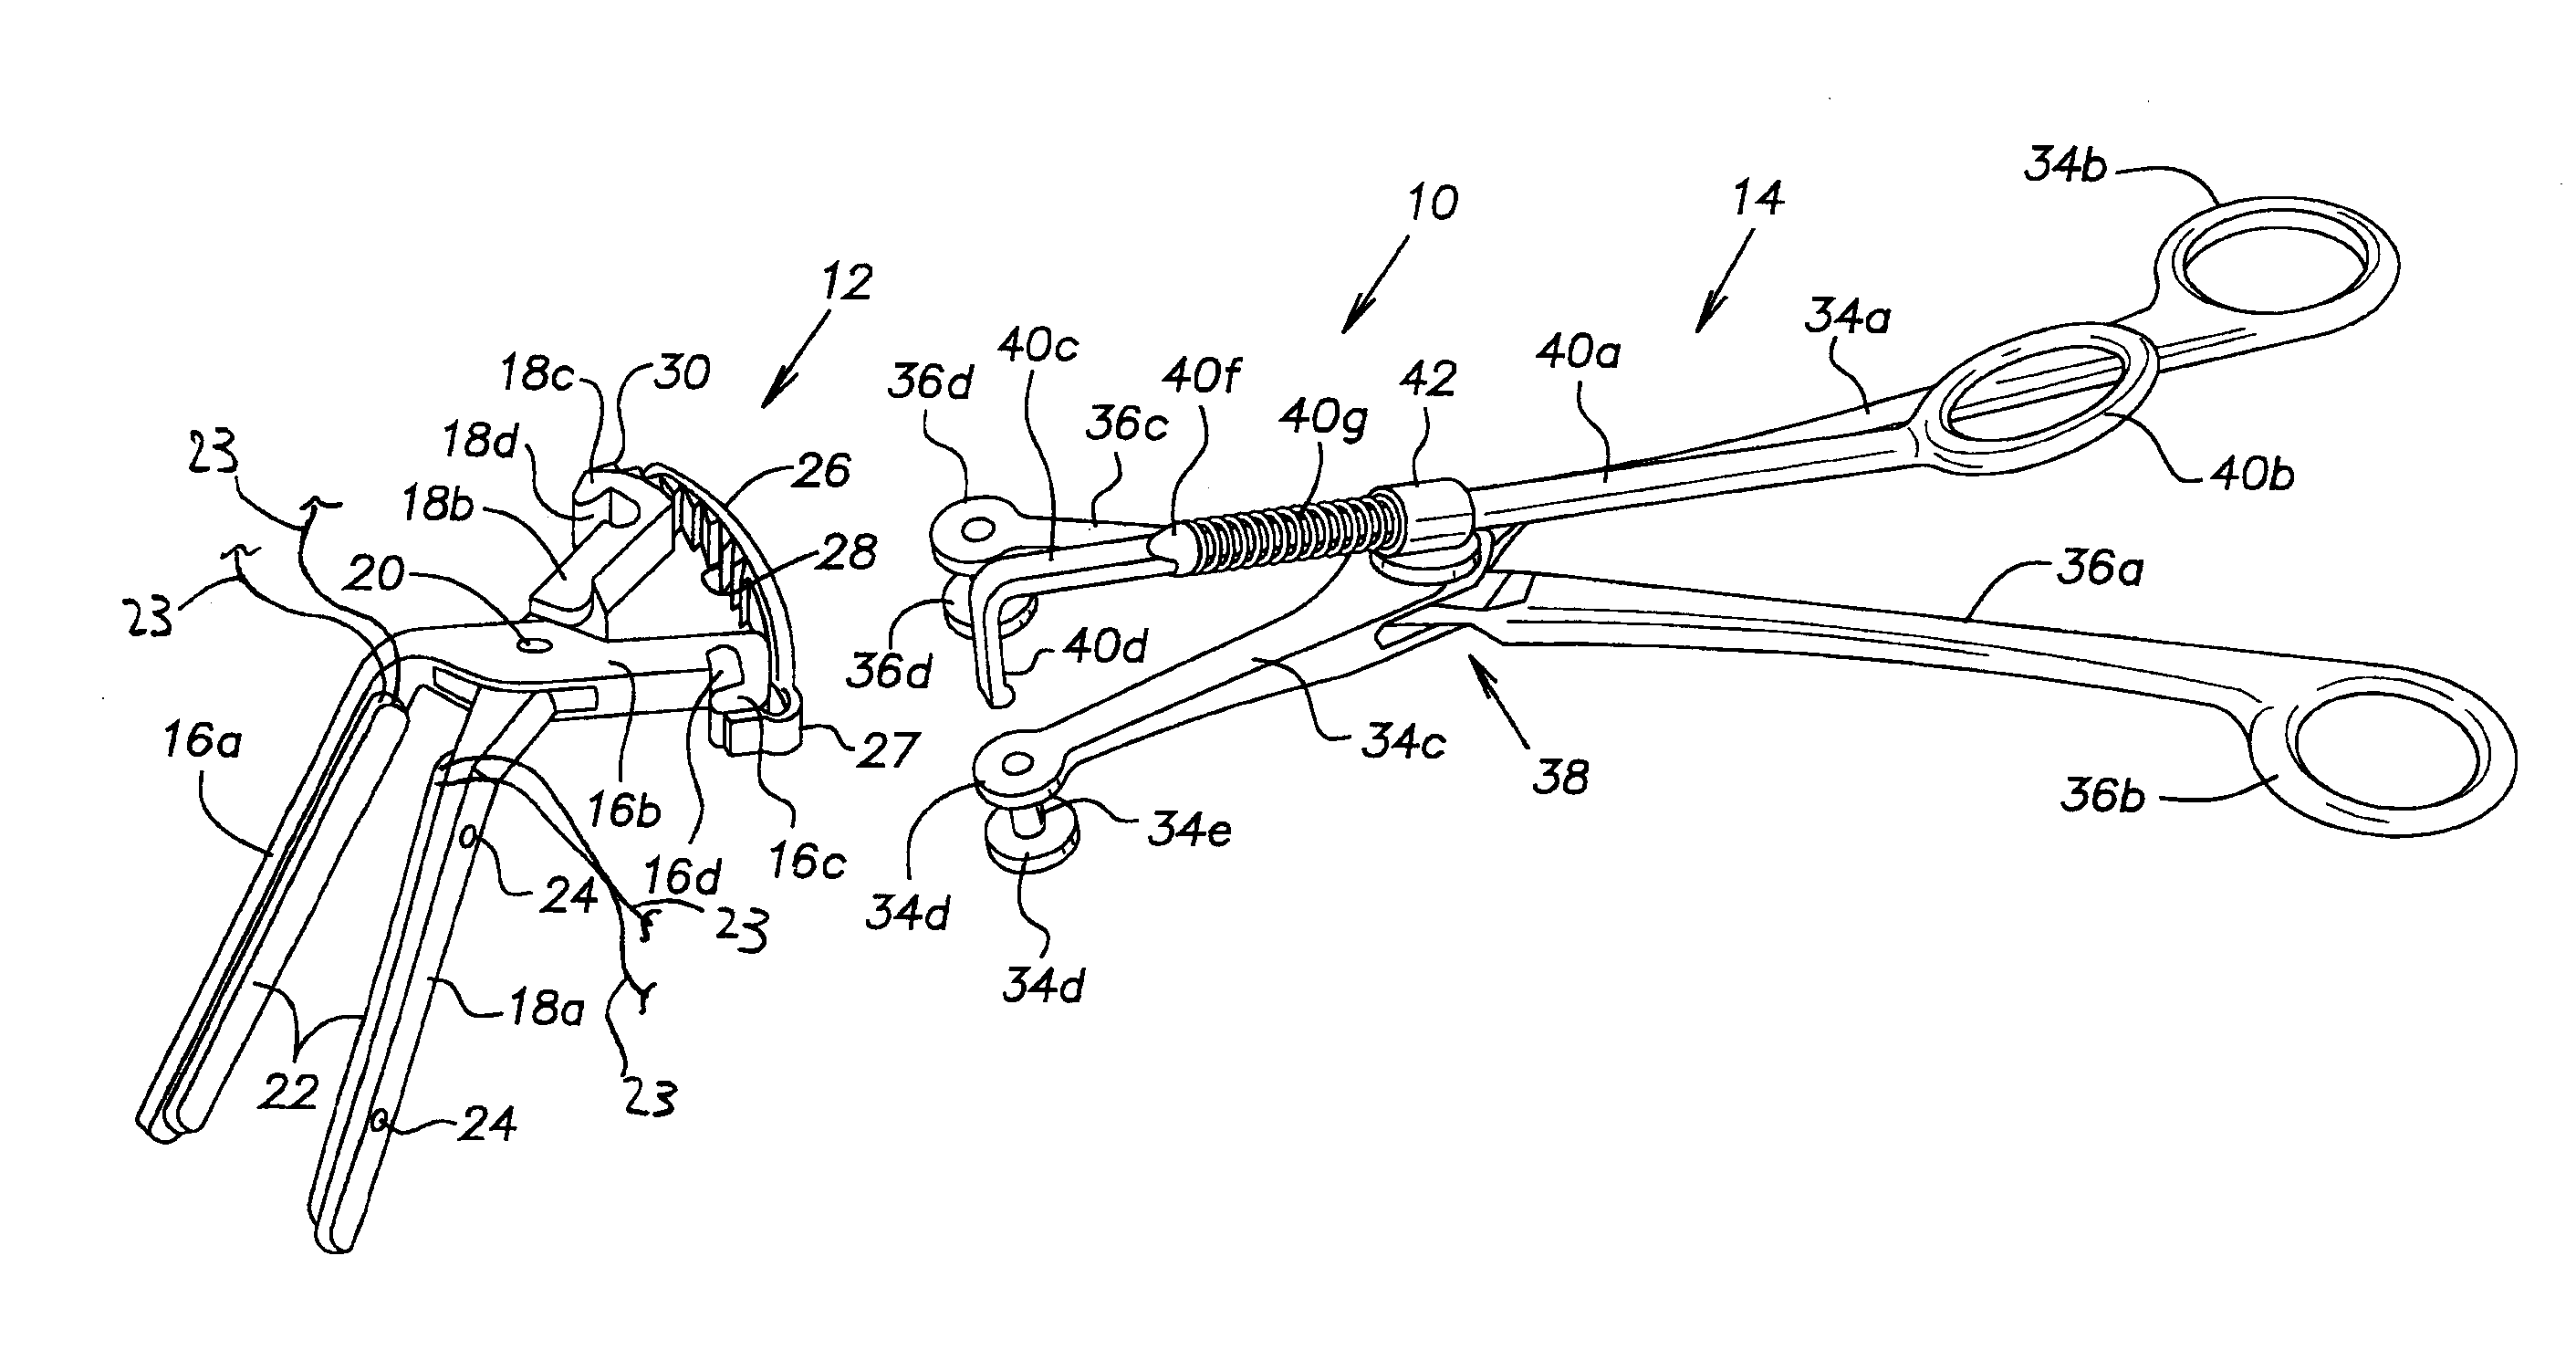 Surgical Clamp Assembly with Electrodes